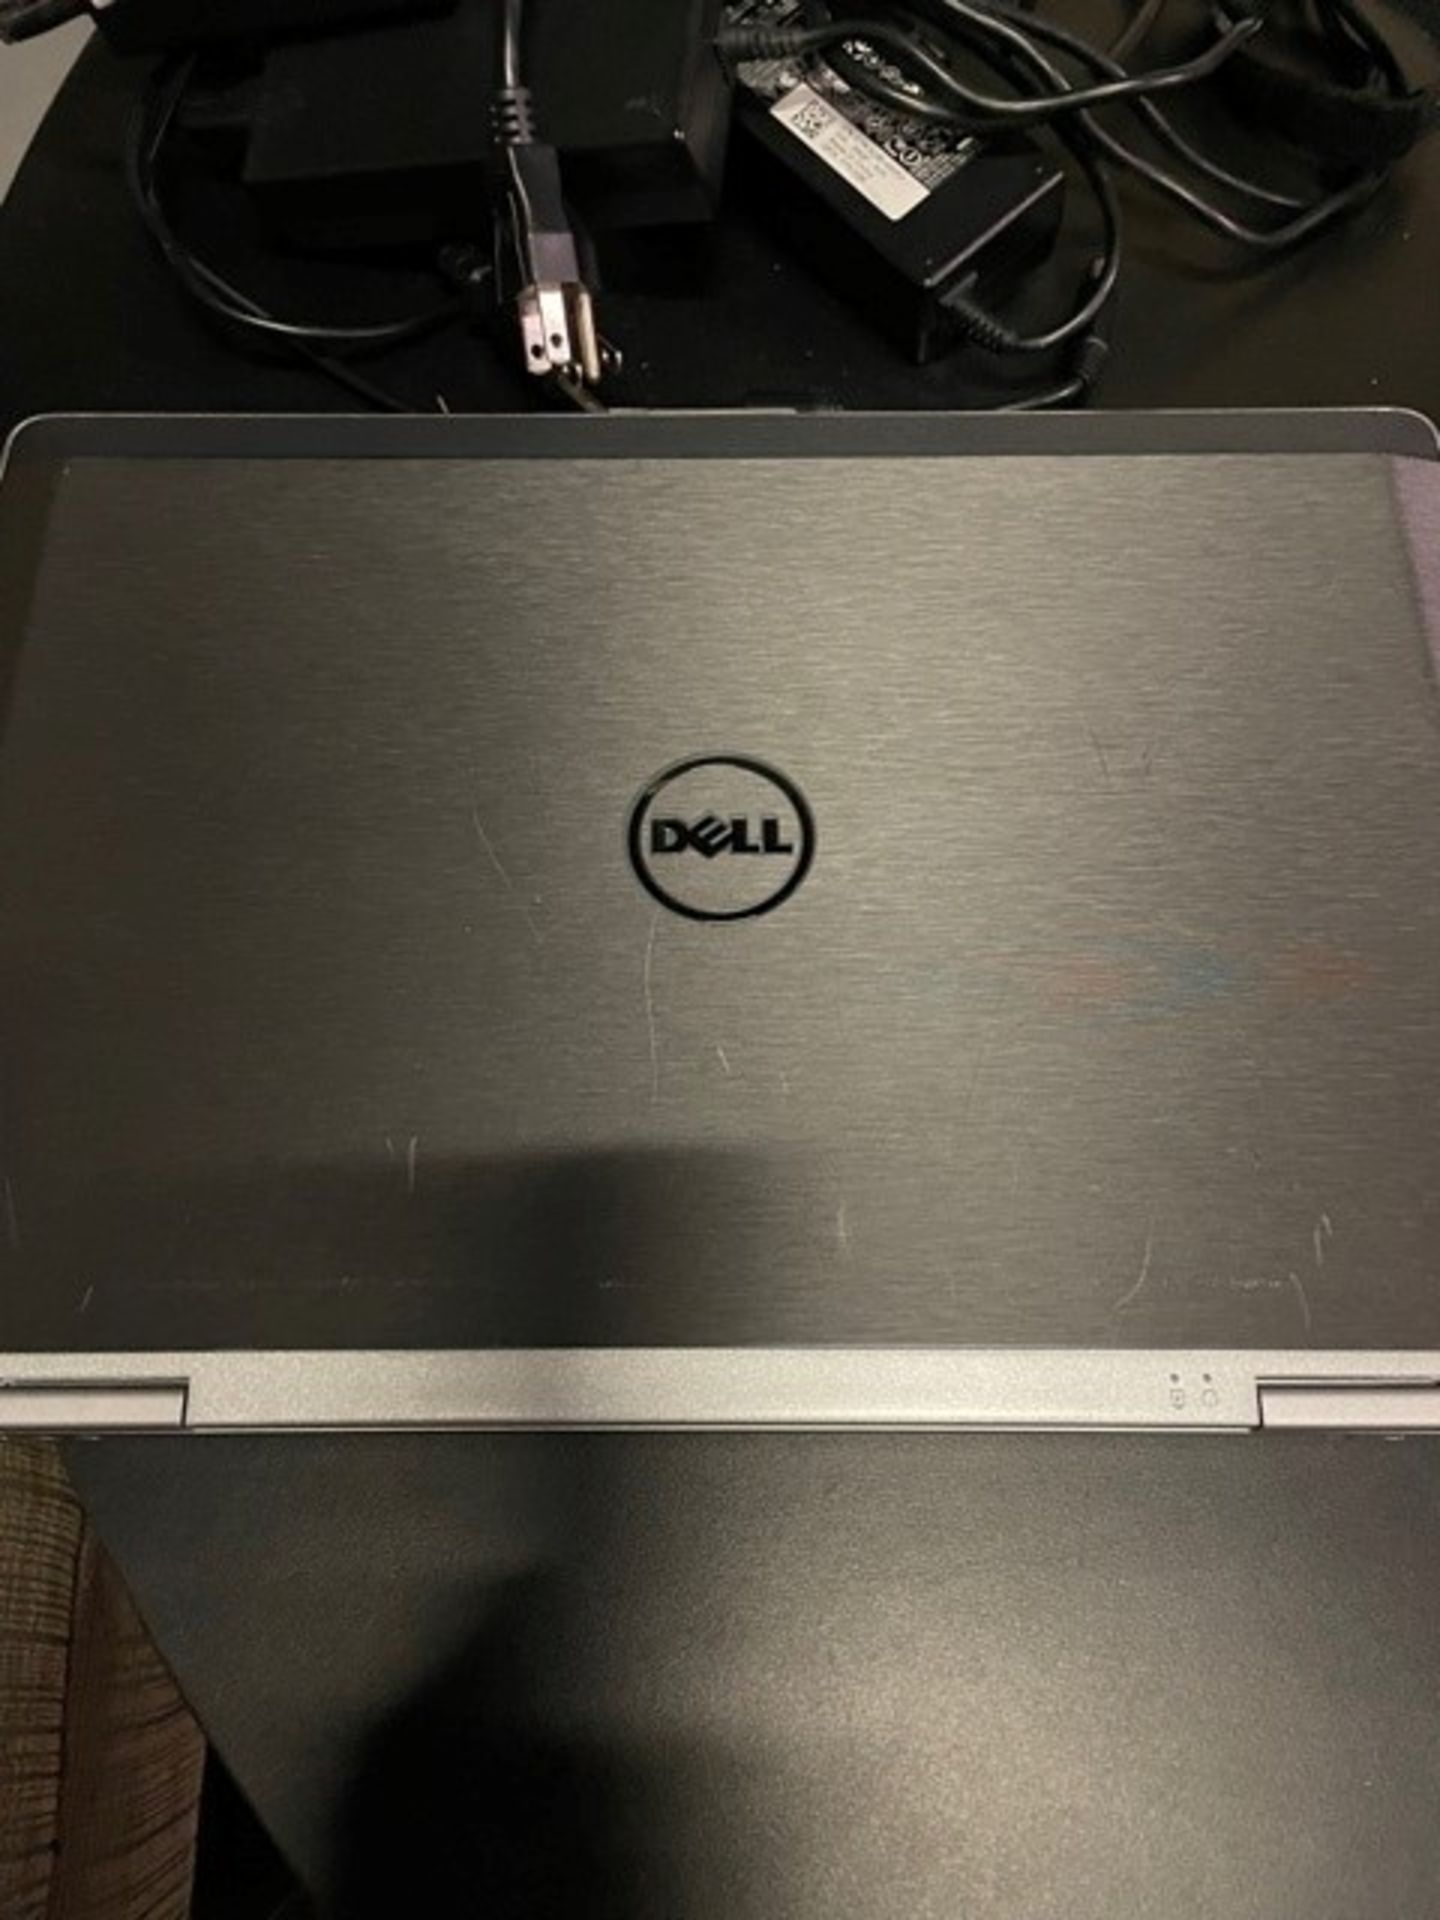 Lot Consisting of (2) Dell Laptops - Image 4 of 6